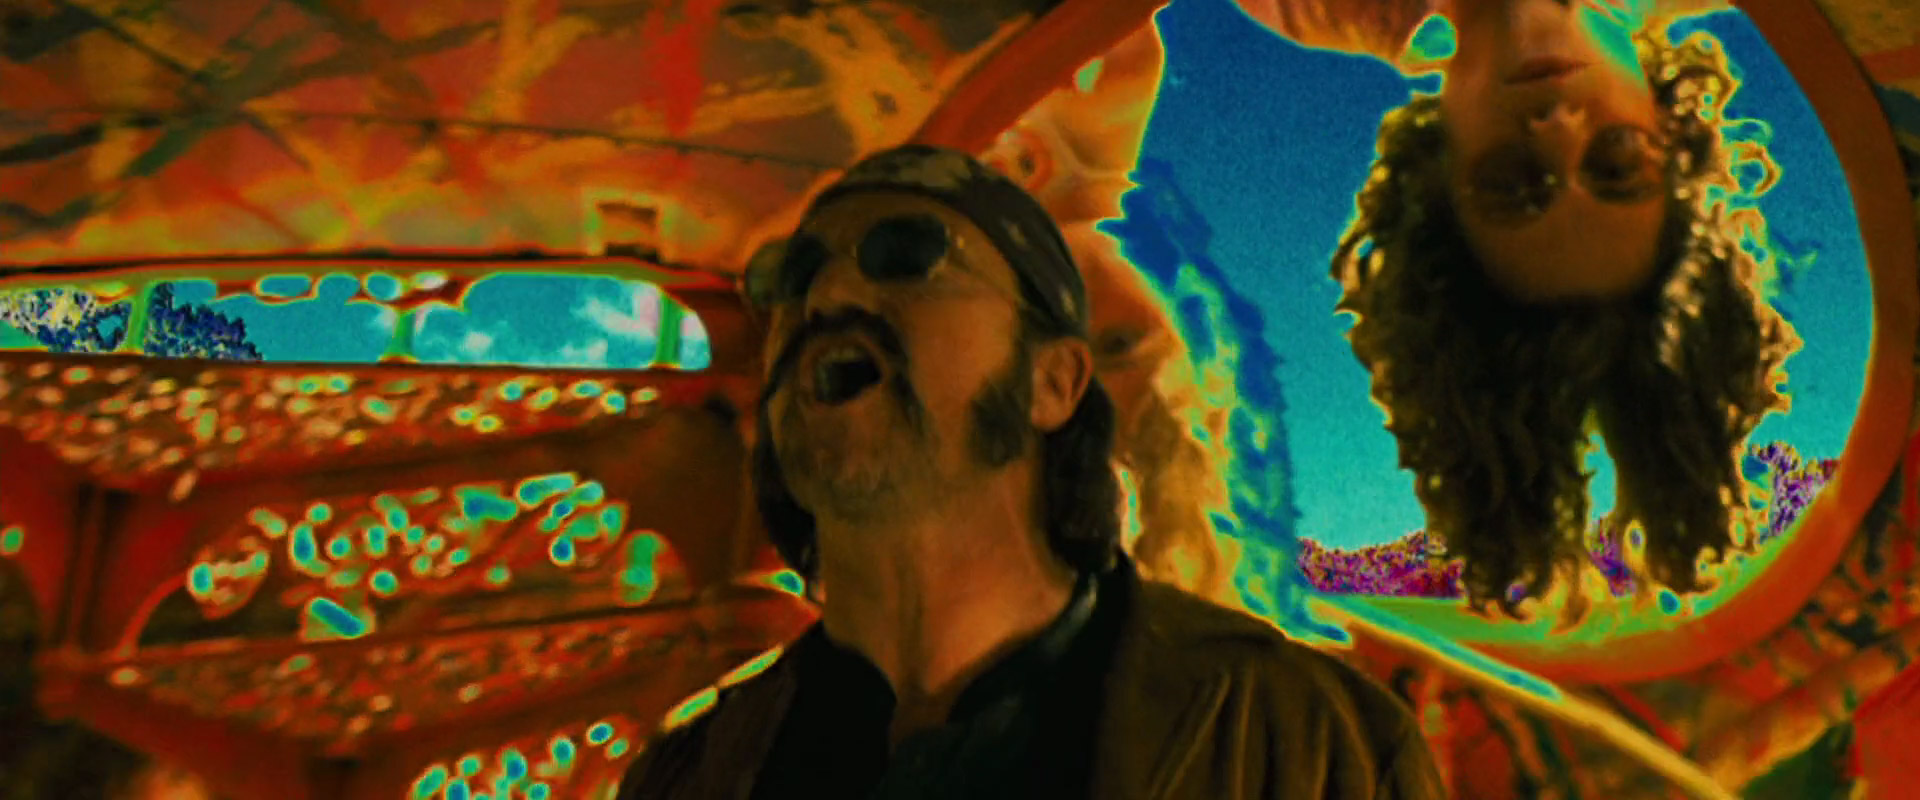 psychedelic imagery in Across the Universe